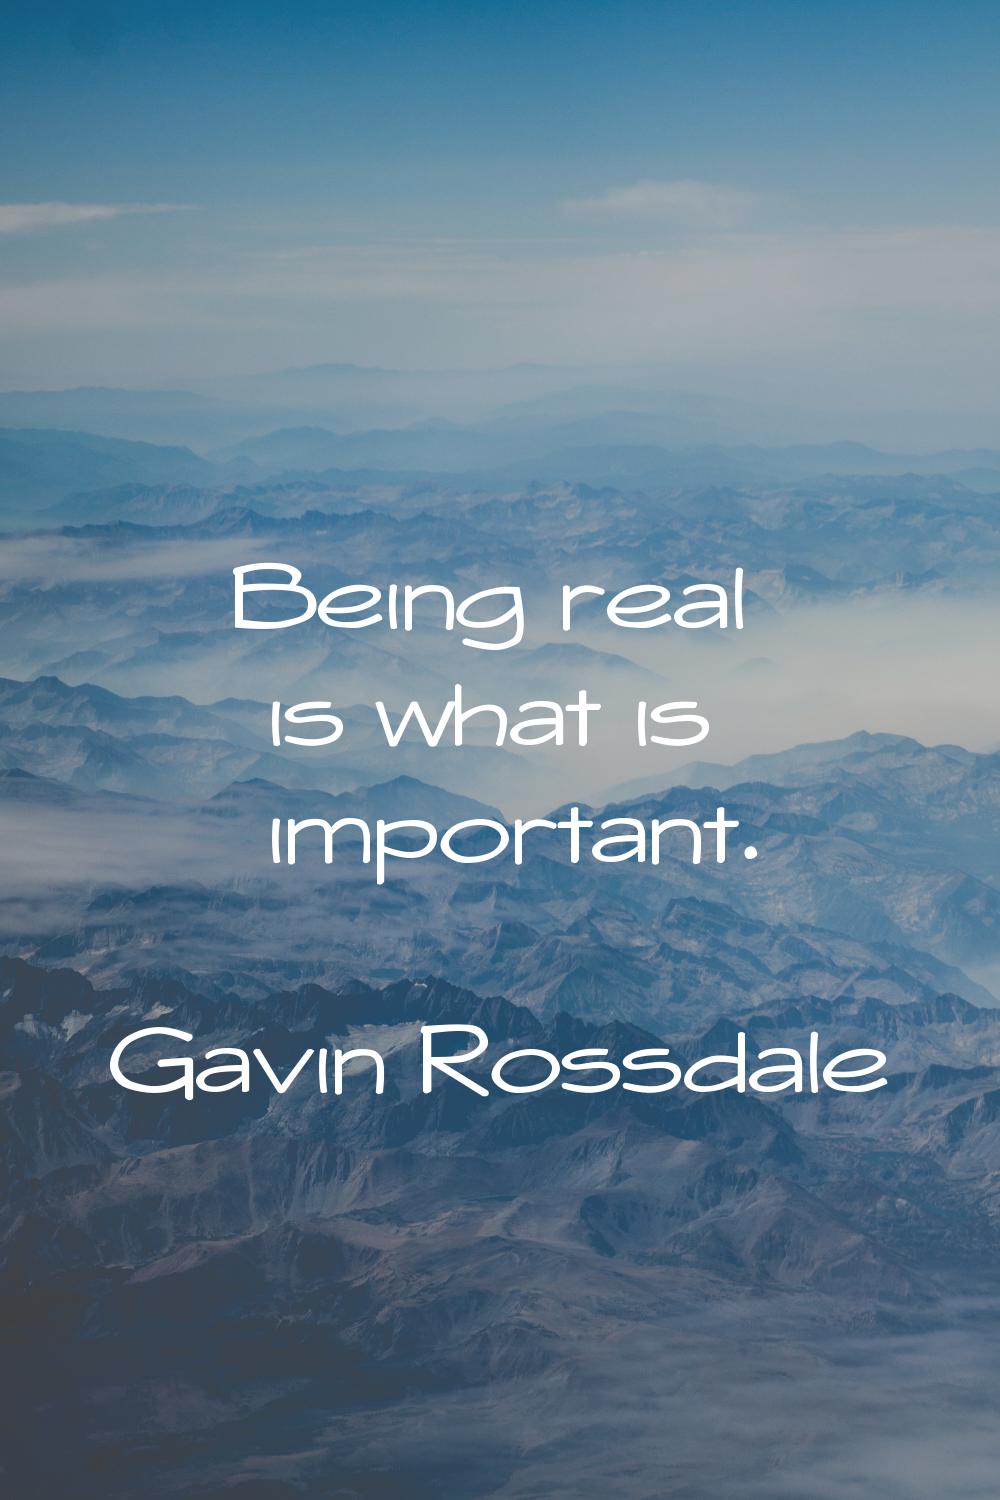 Being real is what is important.